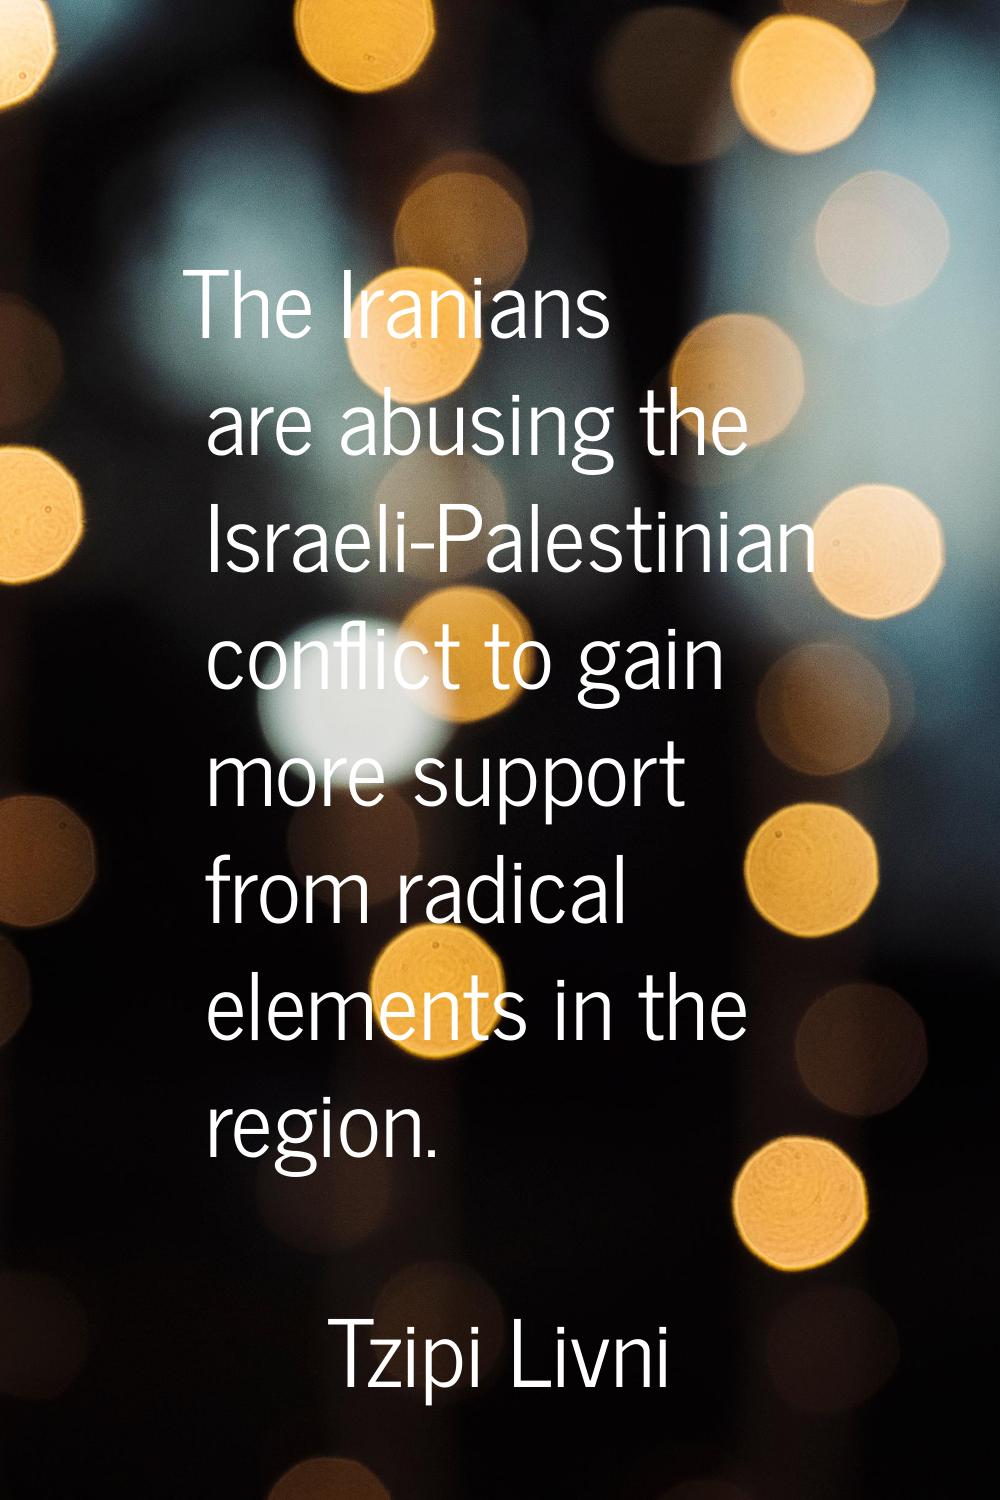 The Iranians are abusing the Israeli-Palestinian conflict to gain more support from radical element